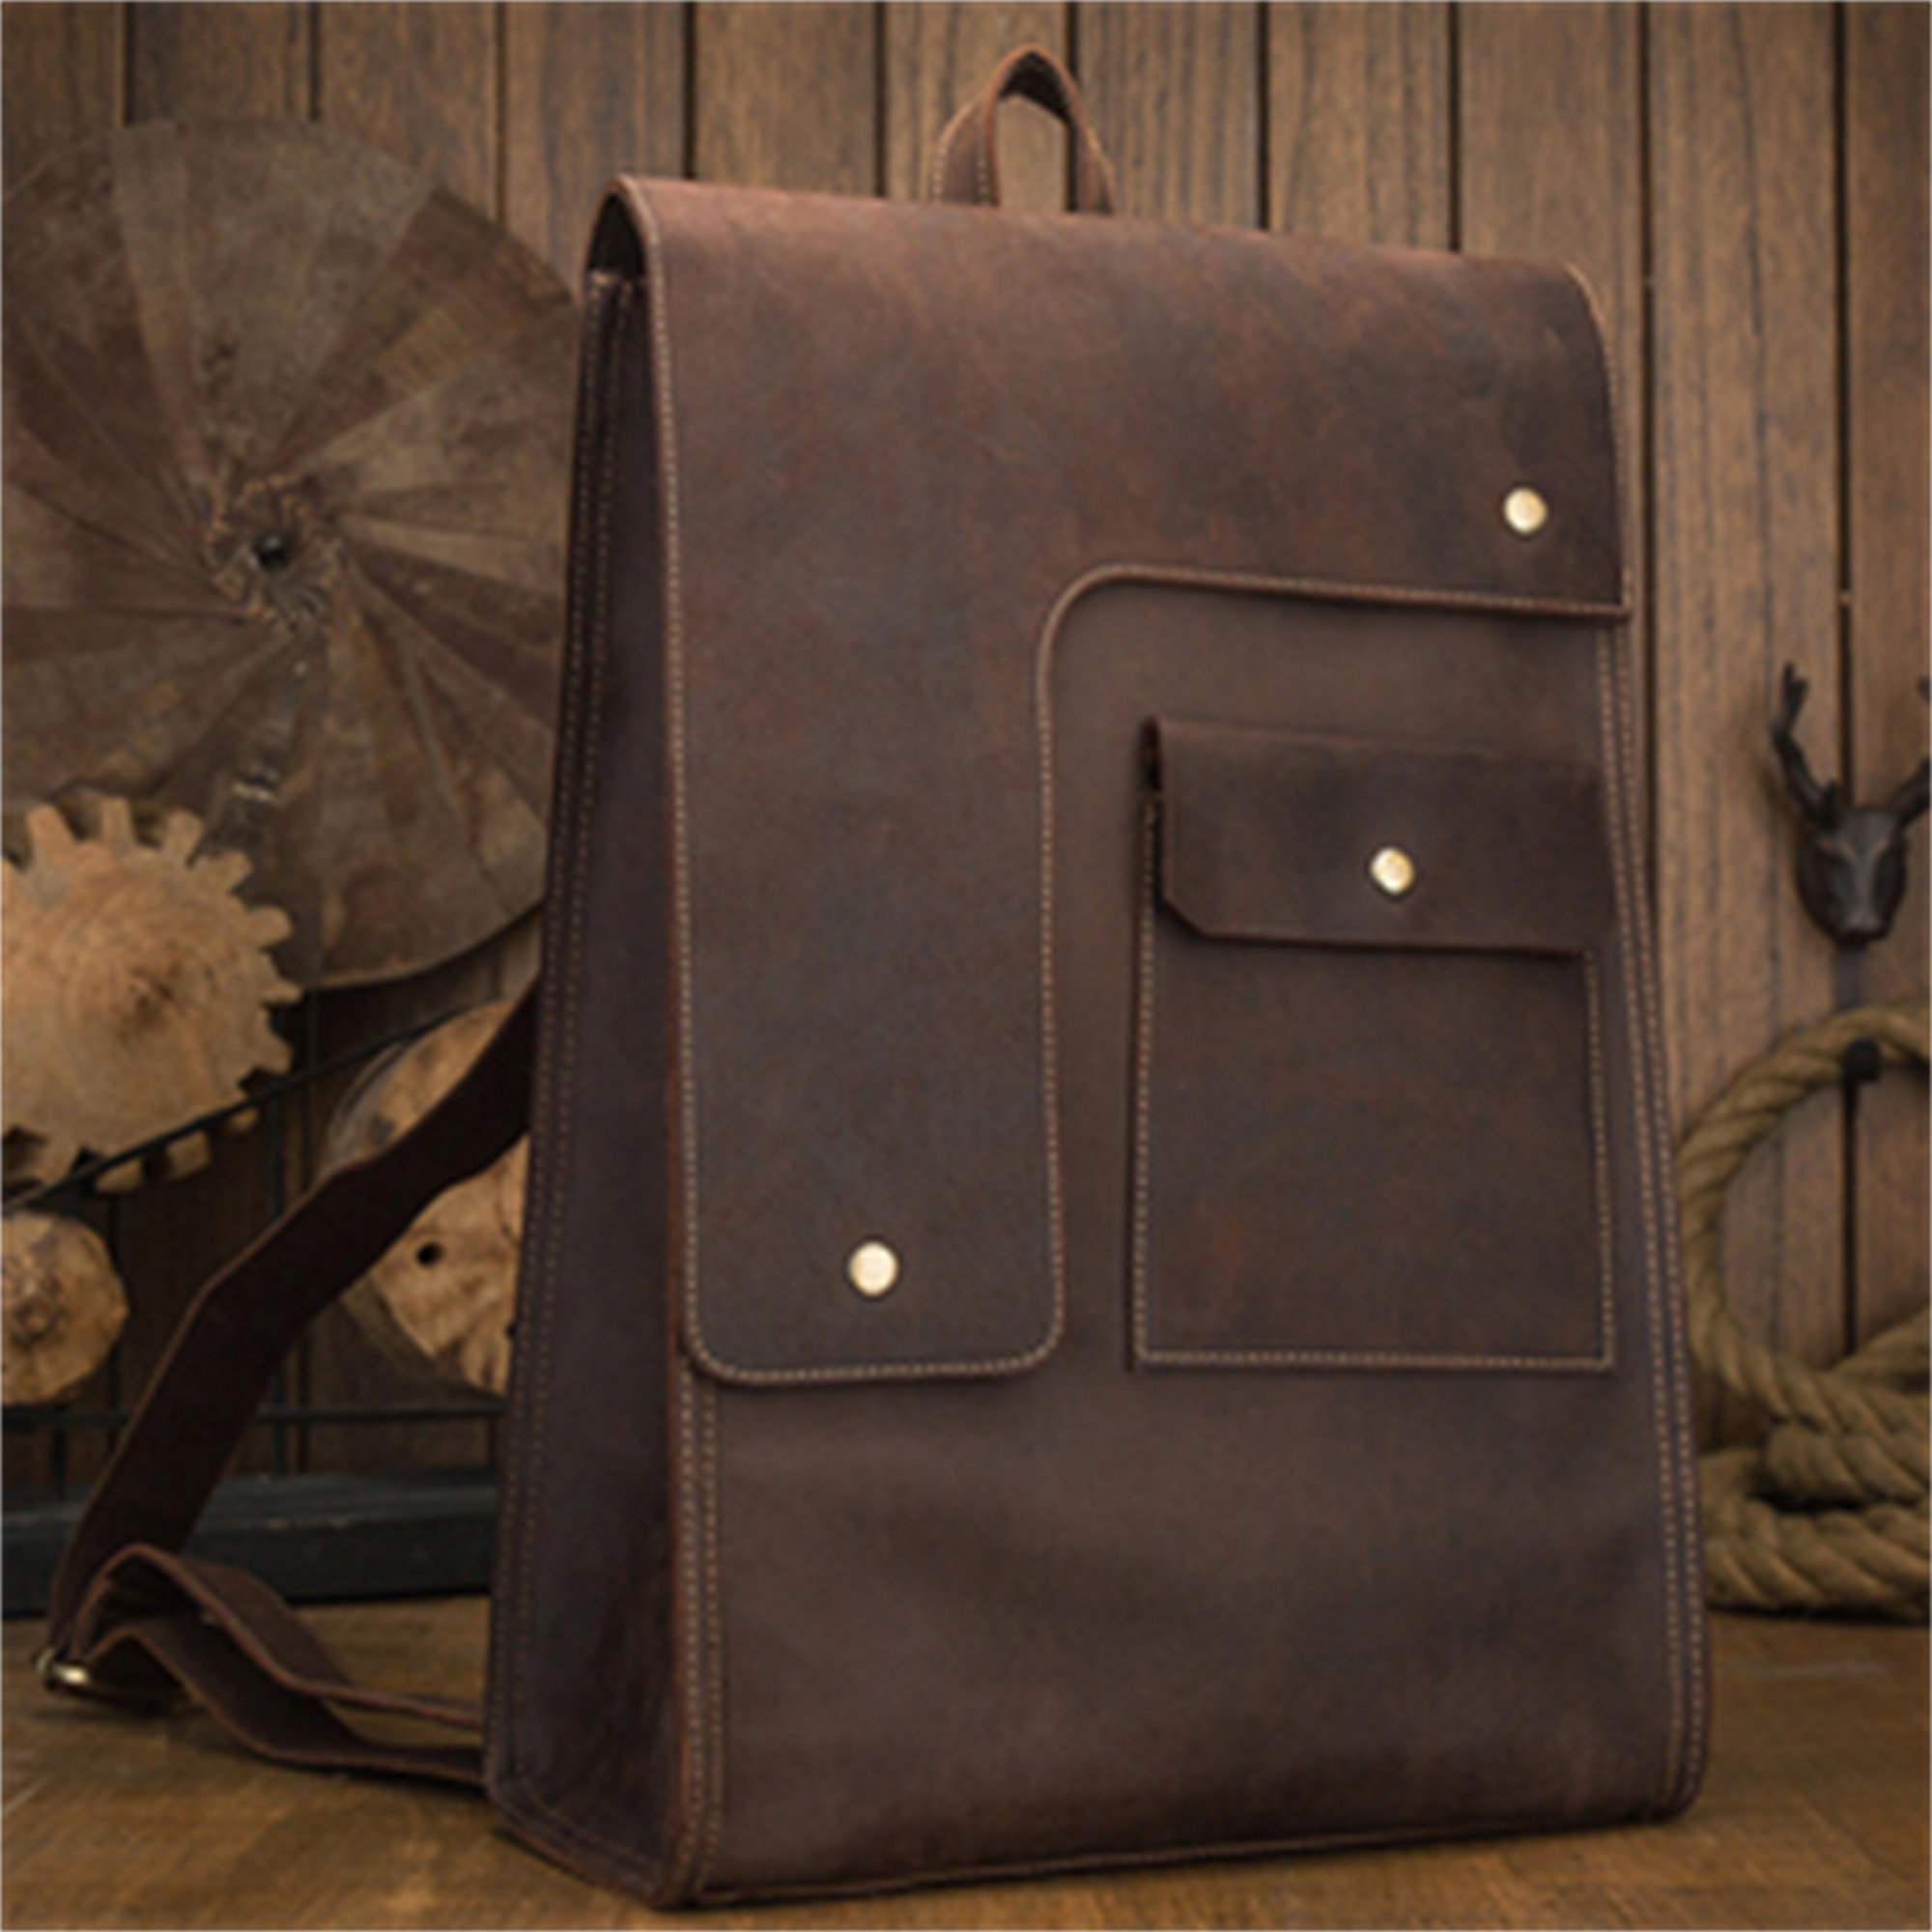 Premium Handmade Leather Laptop Backpack - Stylish and Durable